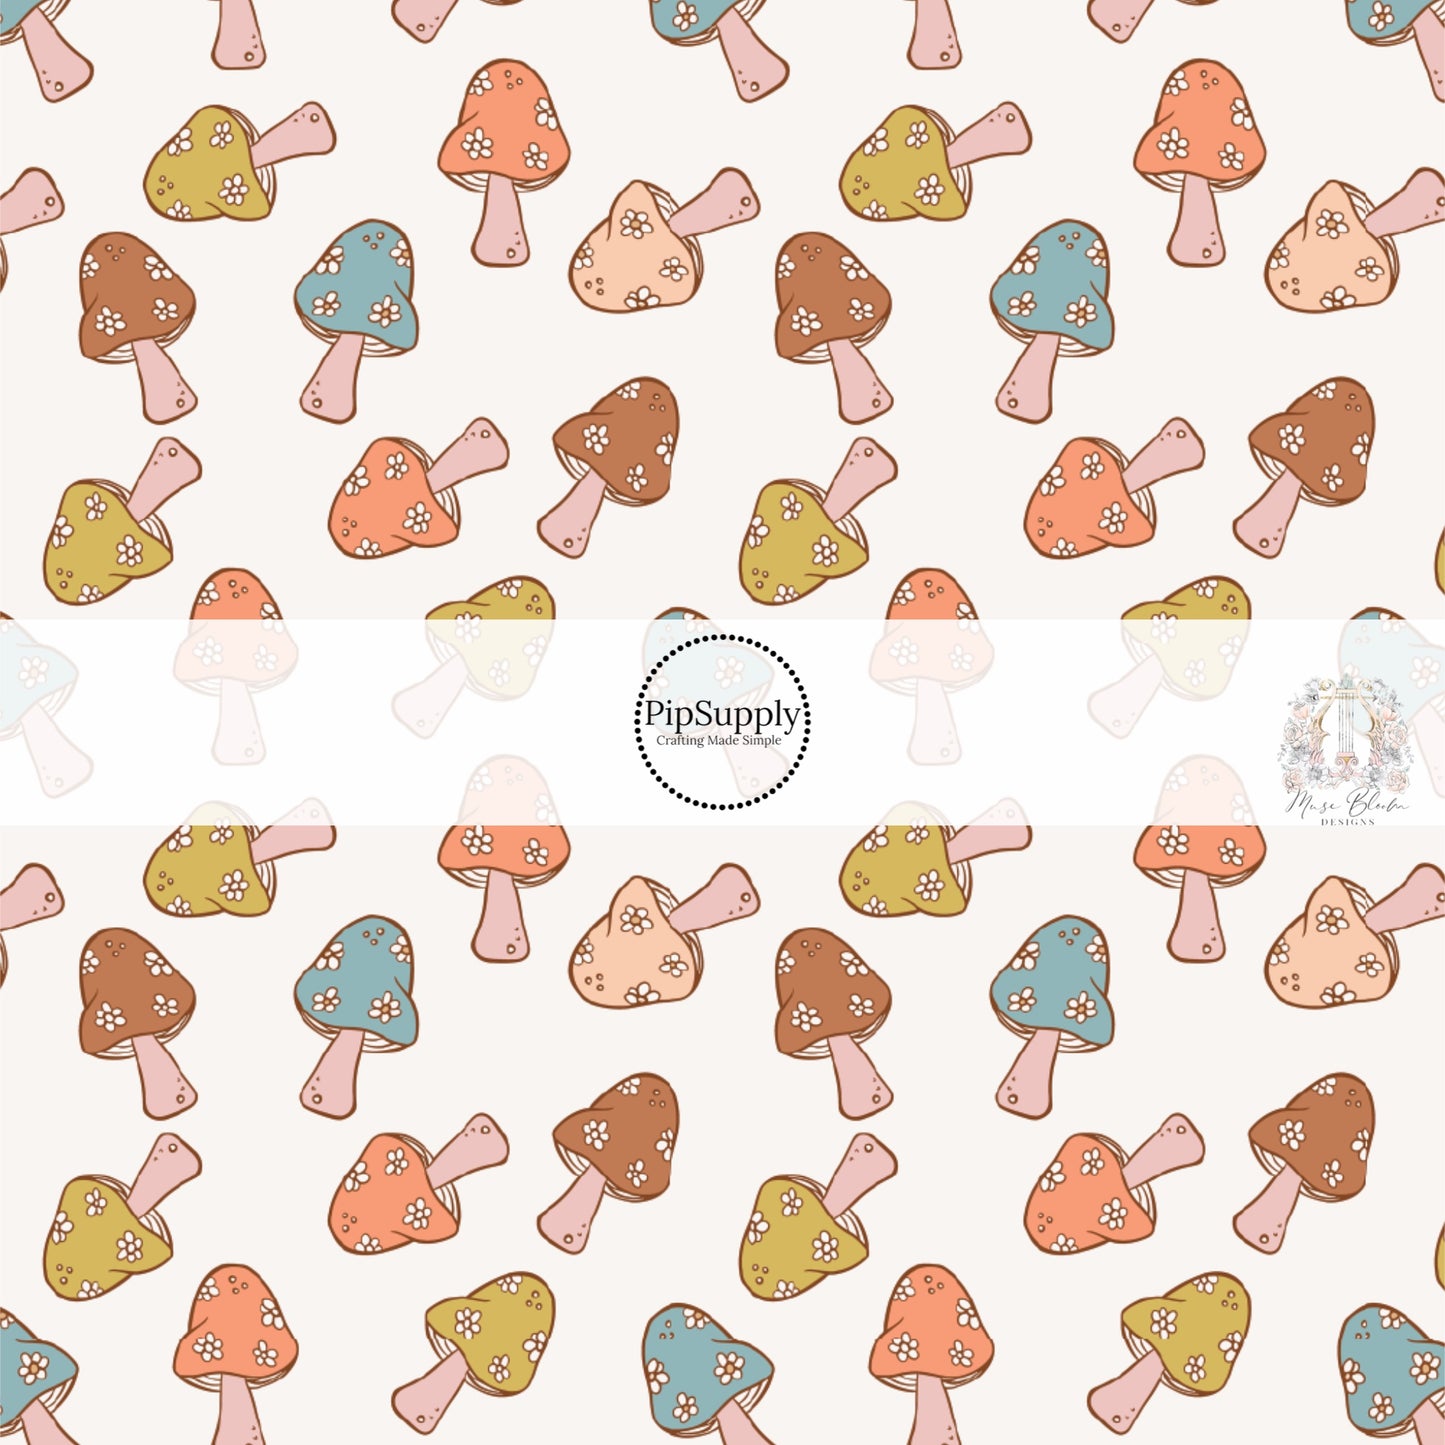 These fall mushroom themed ivory fabric by the yard features small white daisies on orange, blue, green, and cream mushrooms. This fun fall themed fabric can be used for all your sewing and crafting needs! 